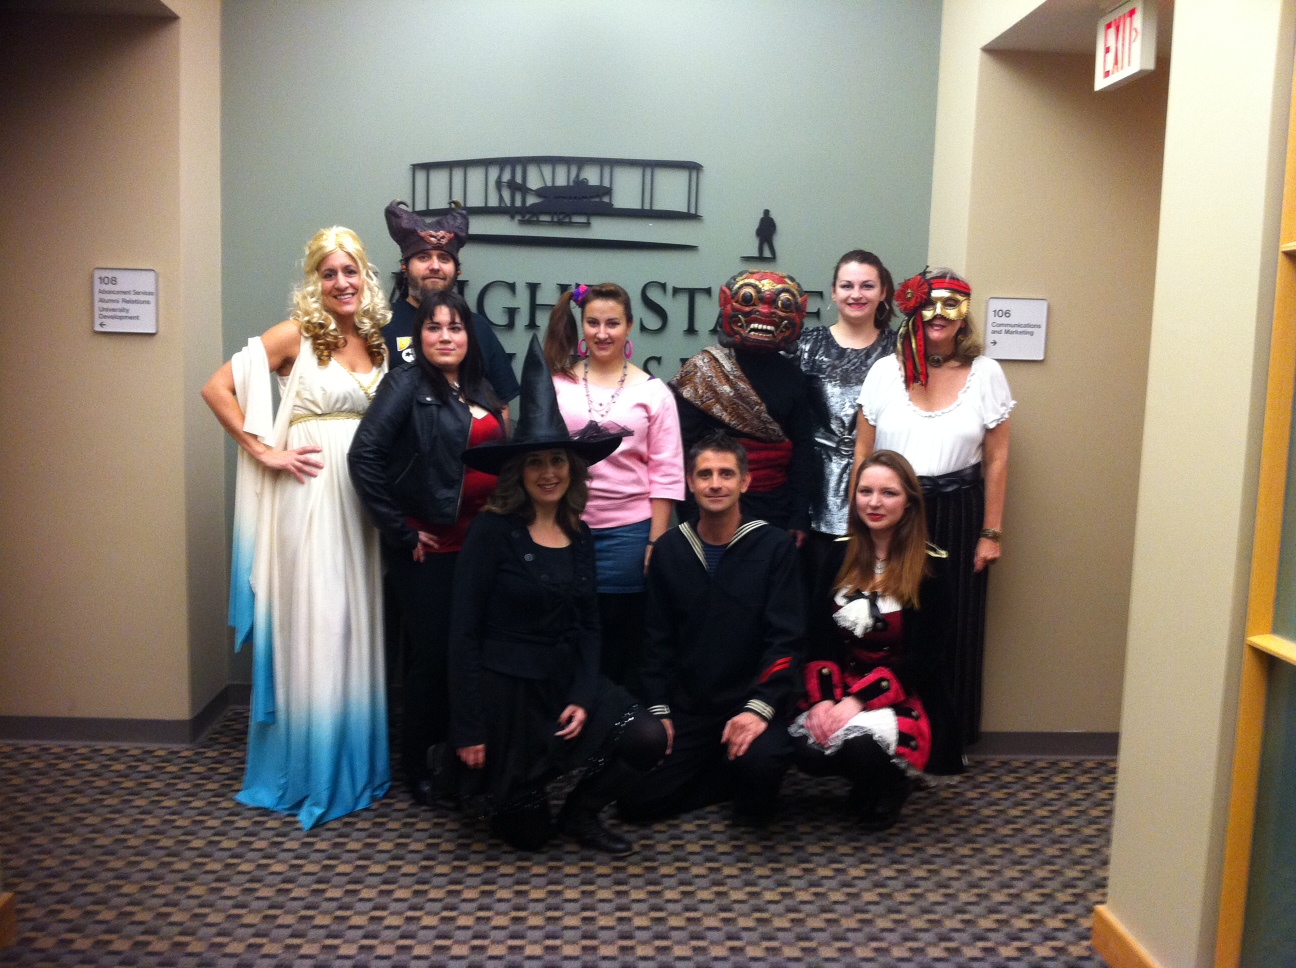 Photo of employees from the office of Communications and Marketing dressed up for Halloween at the office.